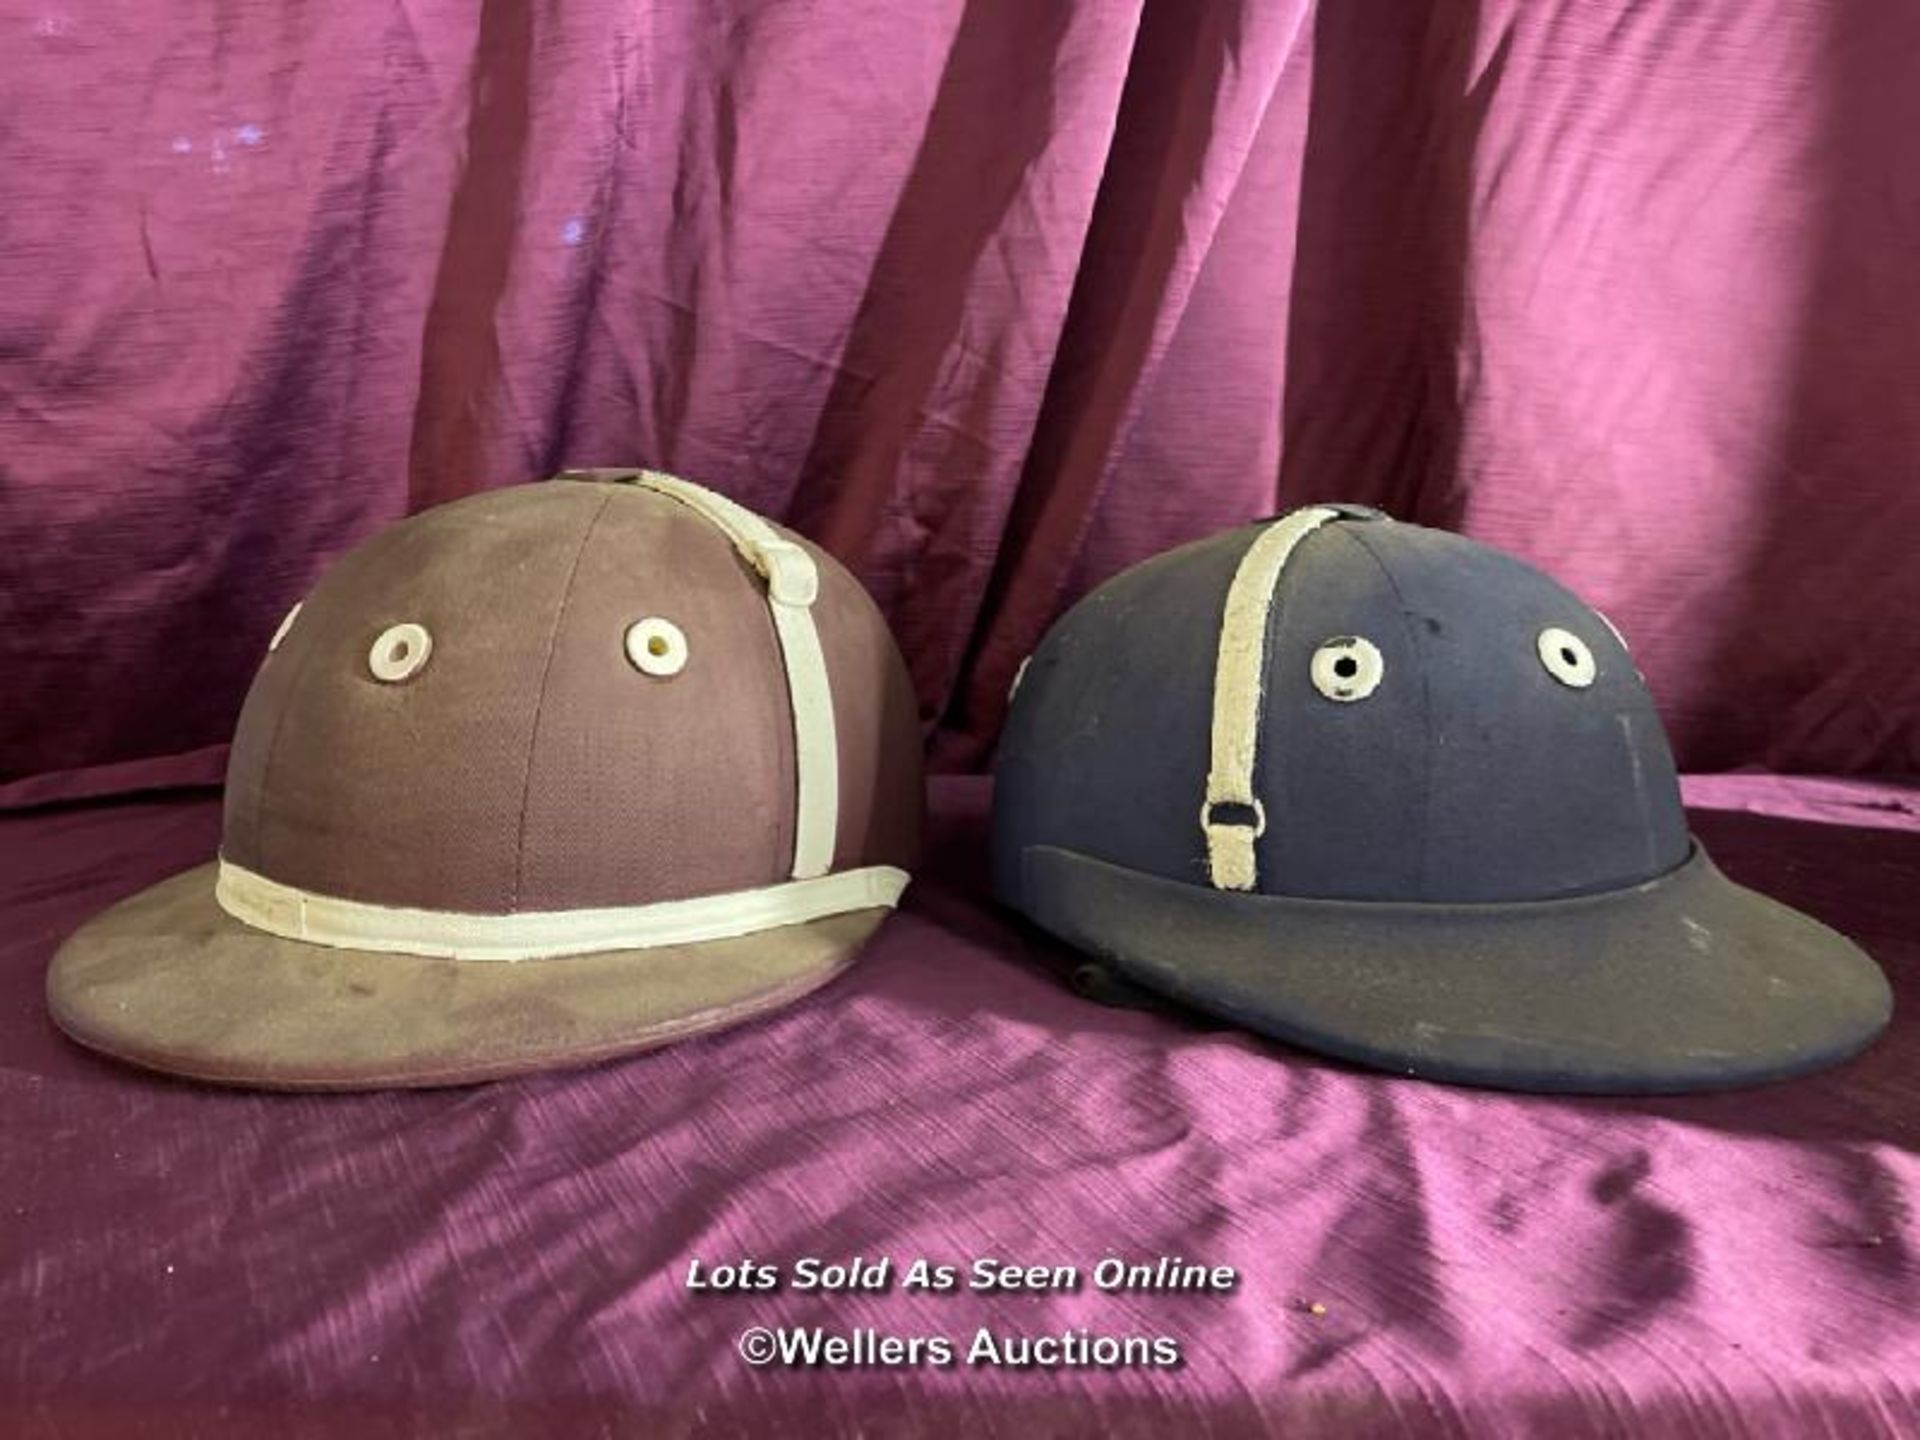 PAIR OF VINTAGE POLO HELMETS, FOR DISPLAY - Image 3 of 4